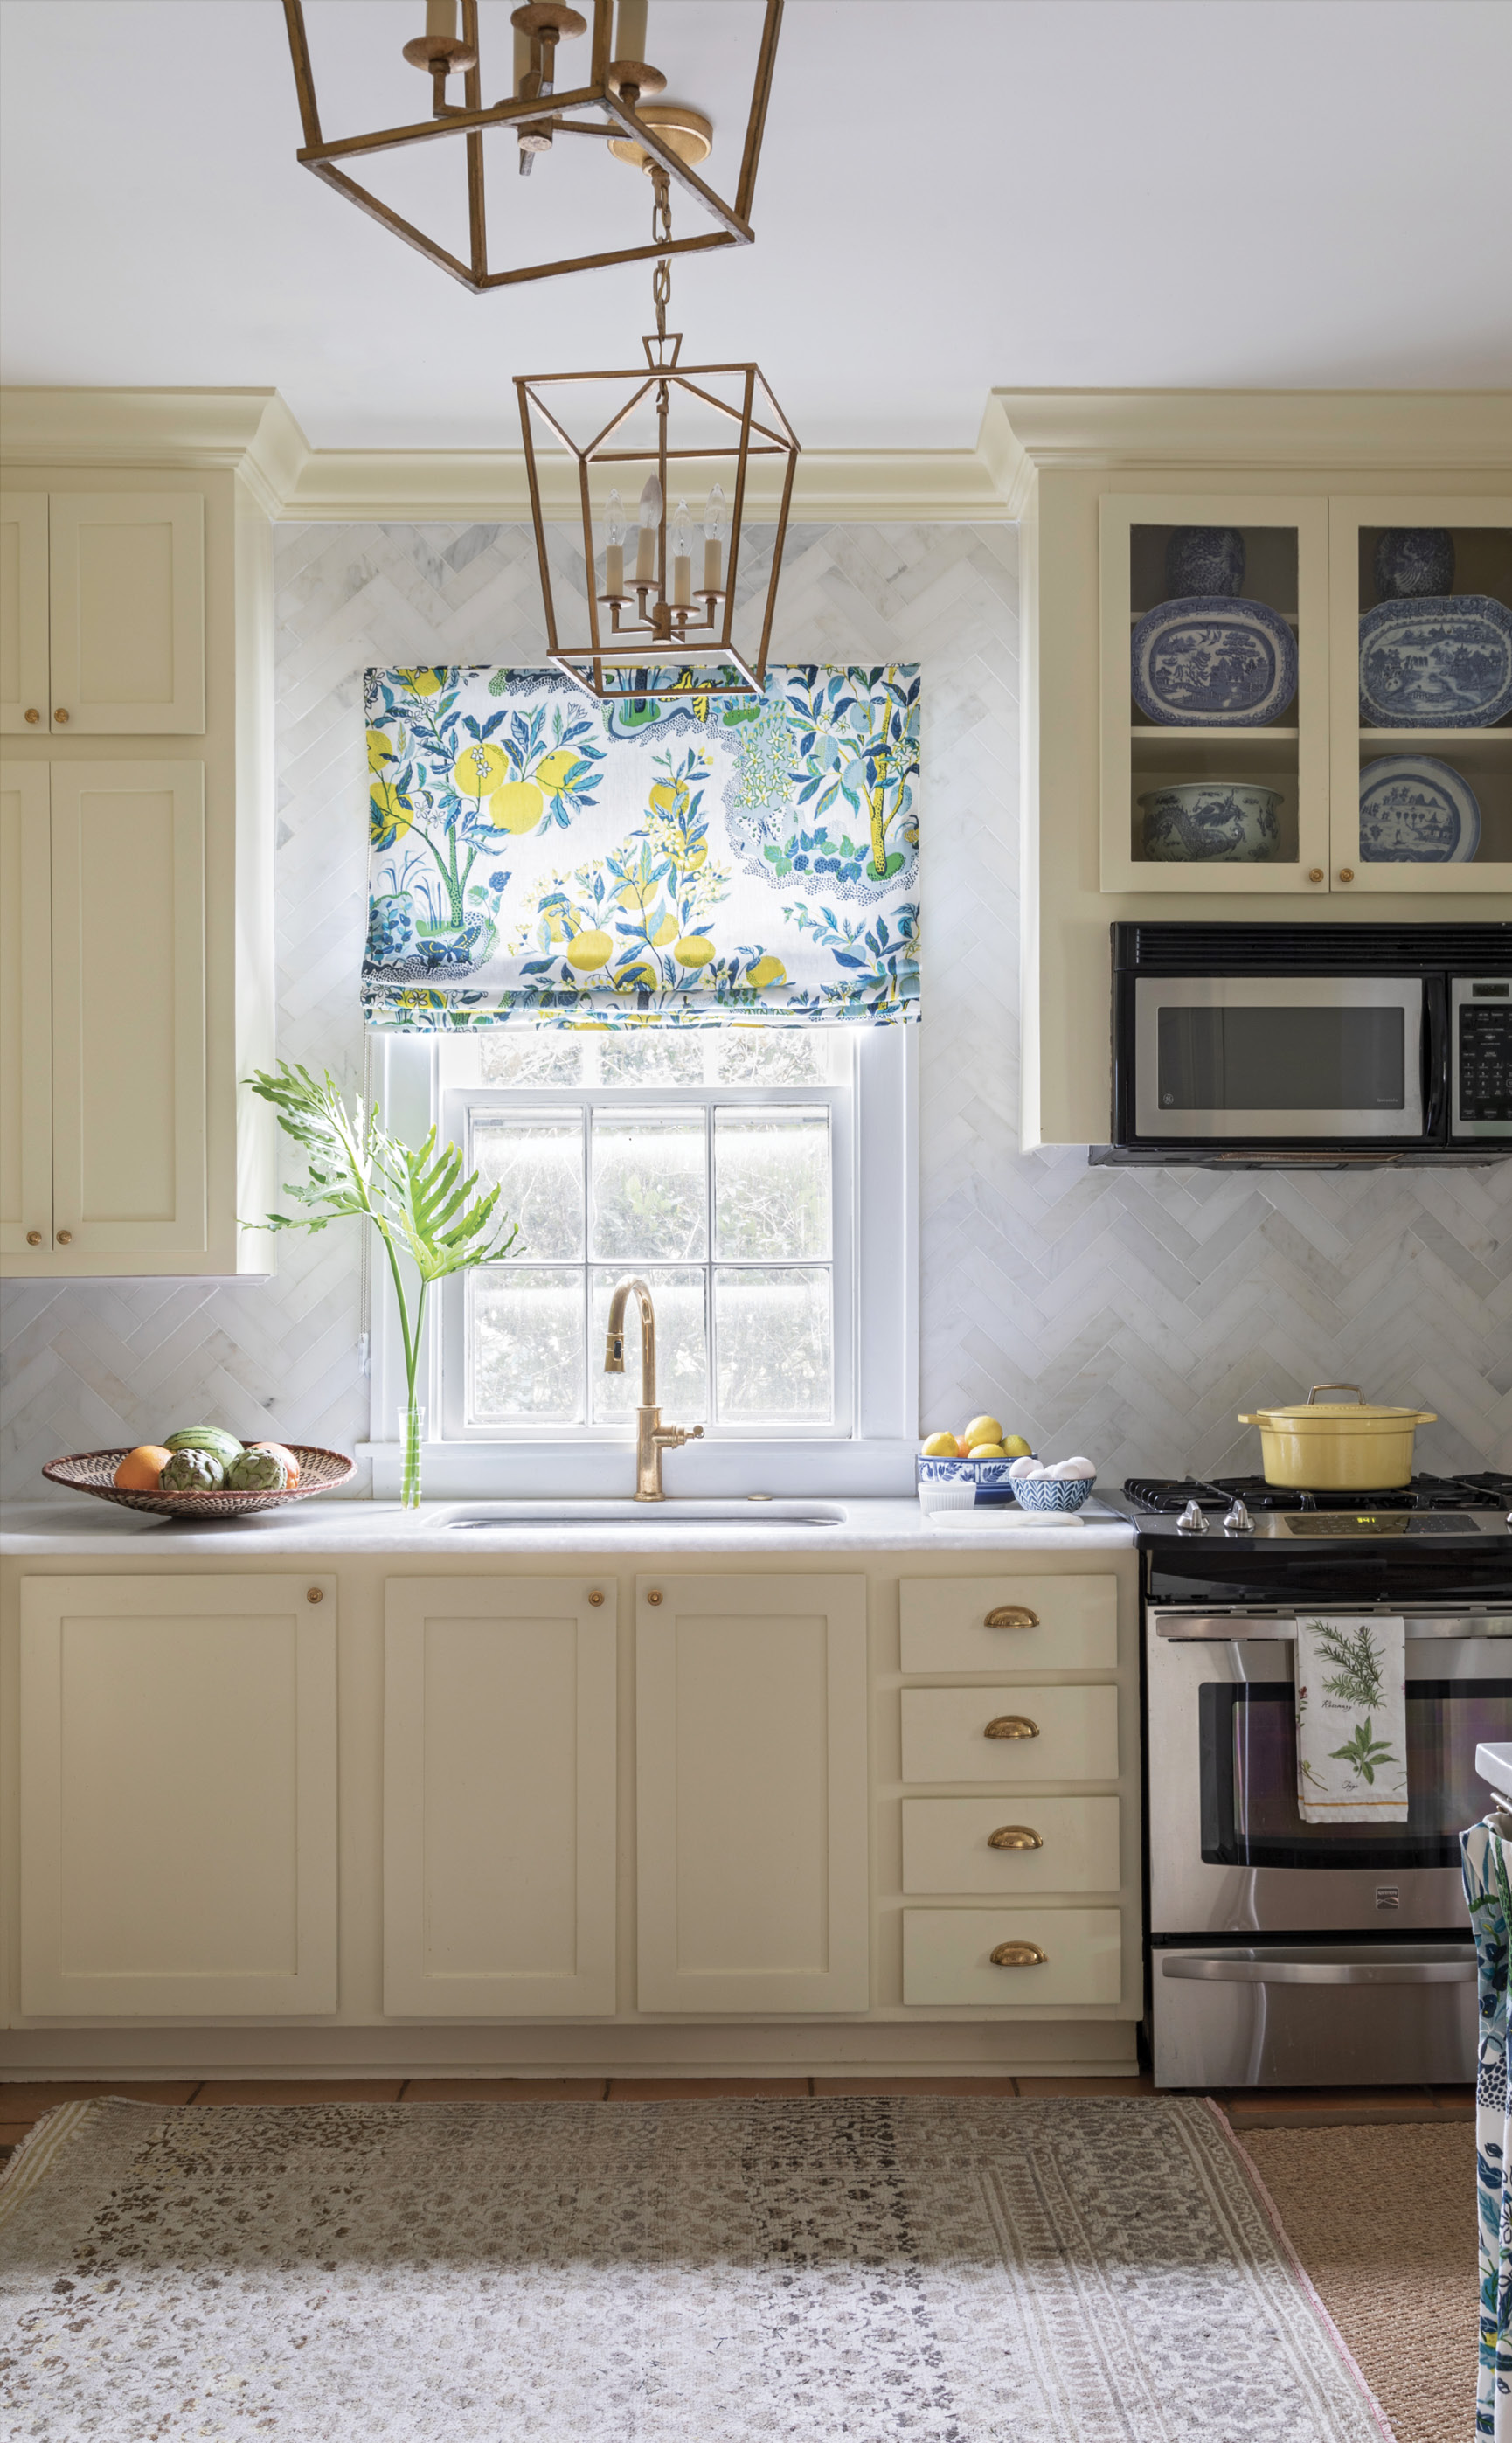 Bright Ideas: A colorful Schumacher fabric, hanging above the window and concealing a washer and dryer (above), makes a bold statement in this traditional cottage kitchen. Soft yellow Farrow &amp; Ball “Pale Hound” paint paired with brass hardware on the cabinets creates a vintage feel, while a white marble backsplash in a herringbone pattern and a giclée print by Hayley Mitchell add touches of modern luxury.